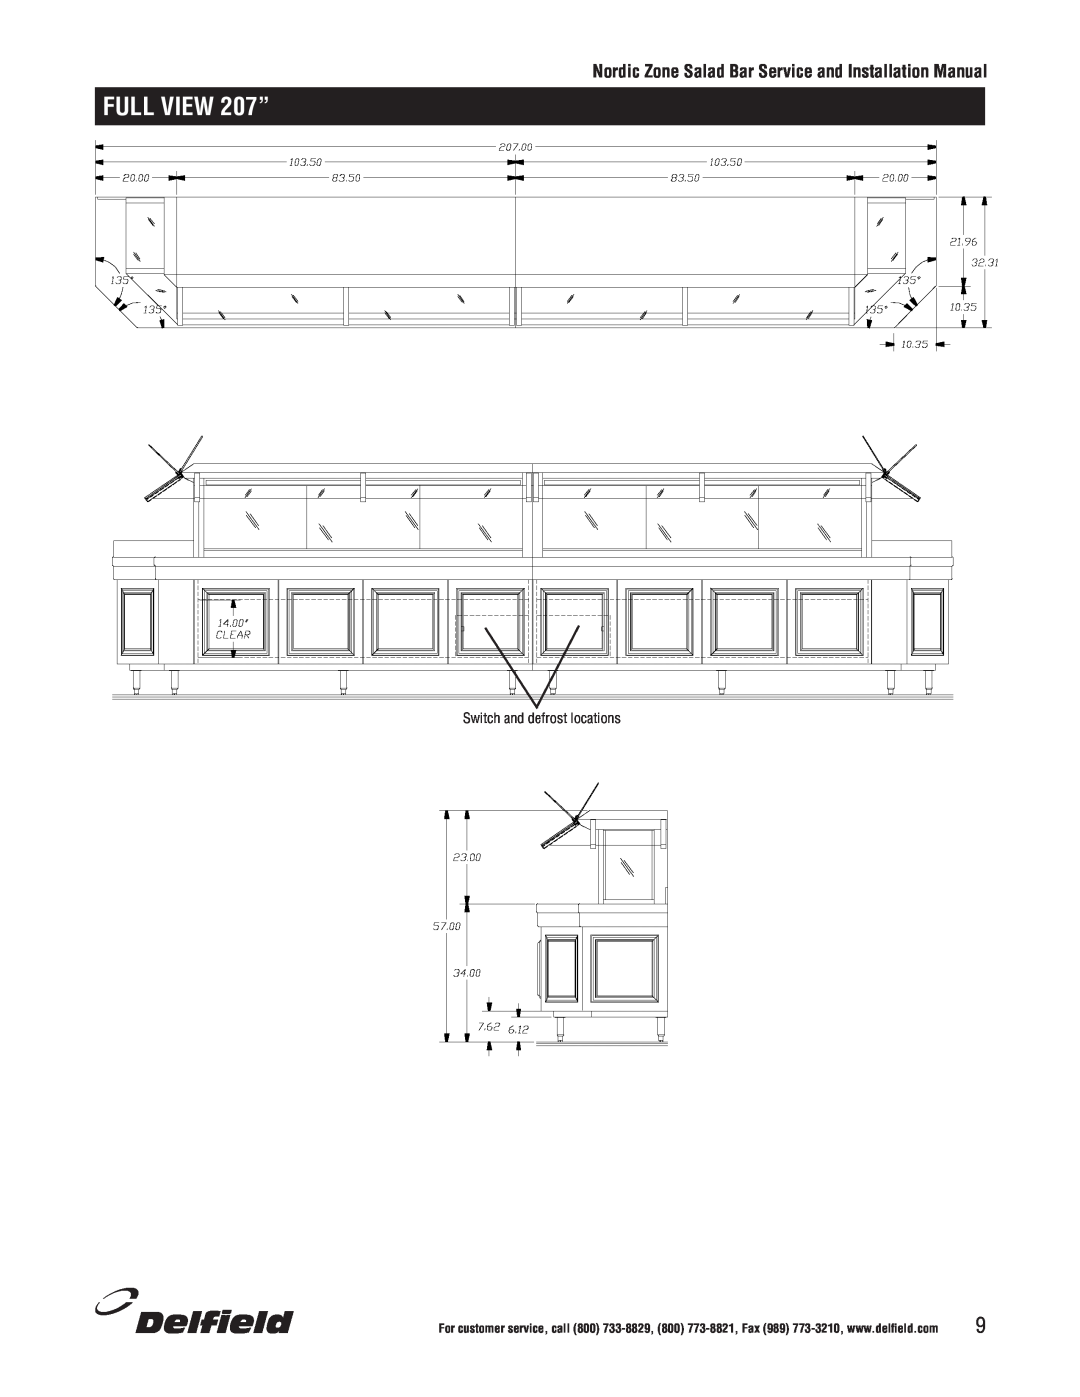 Delfield Cold Food Bars manual FULL VIEW 207”, Switch and defrost locations 